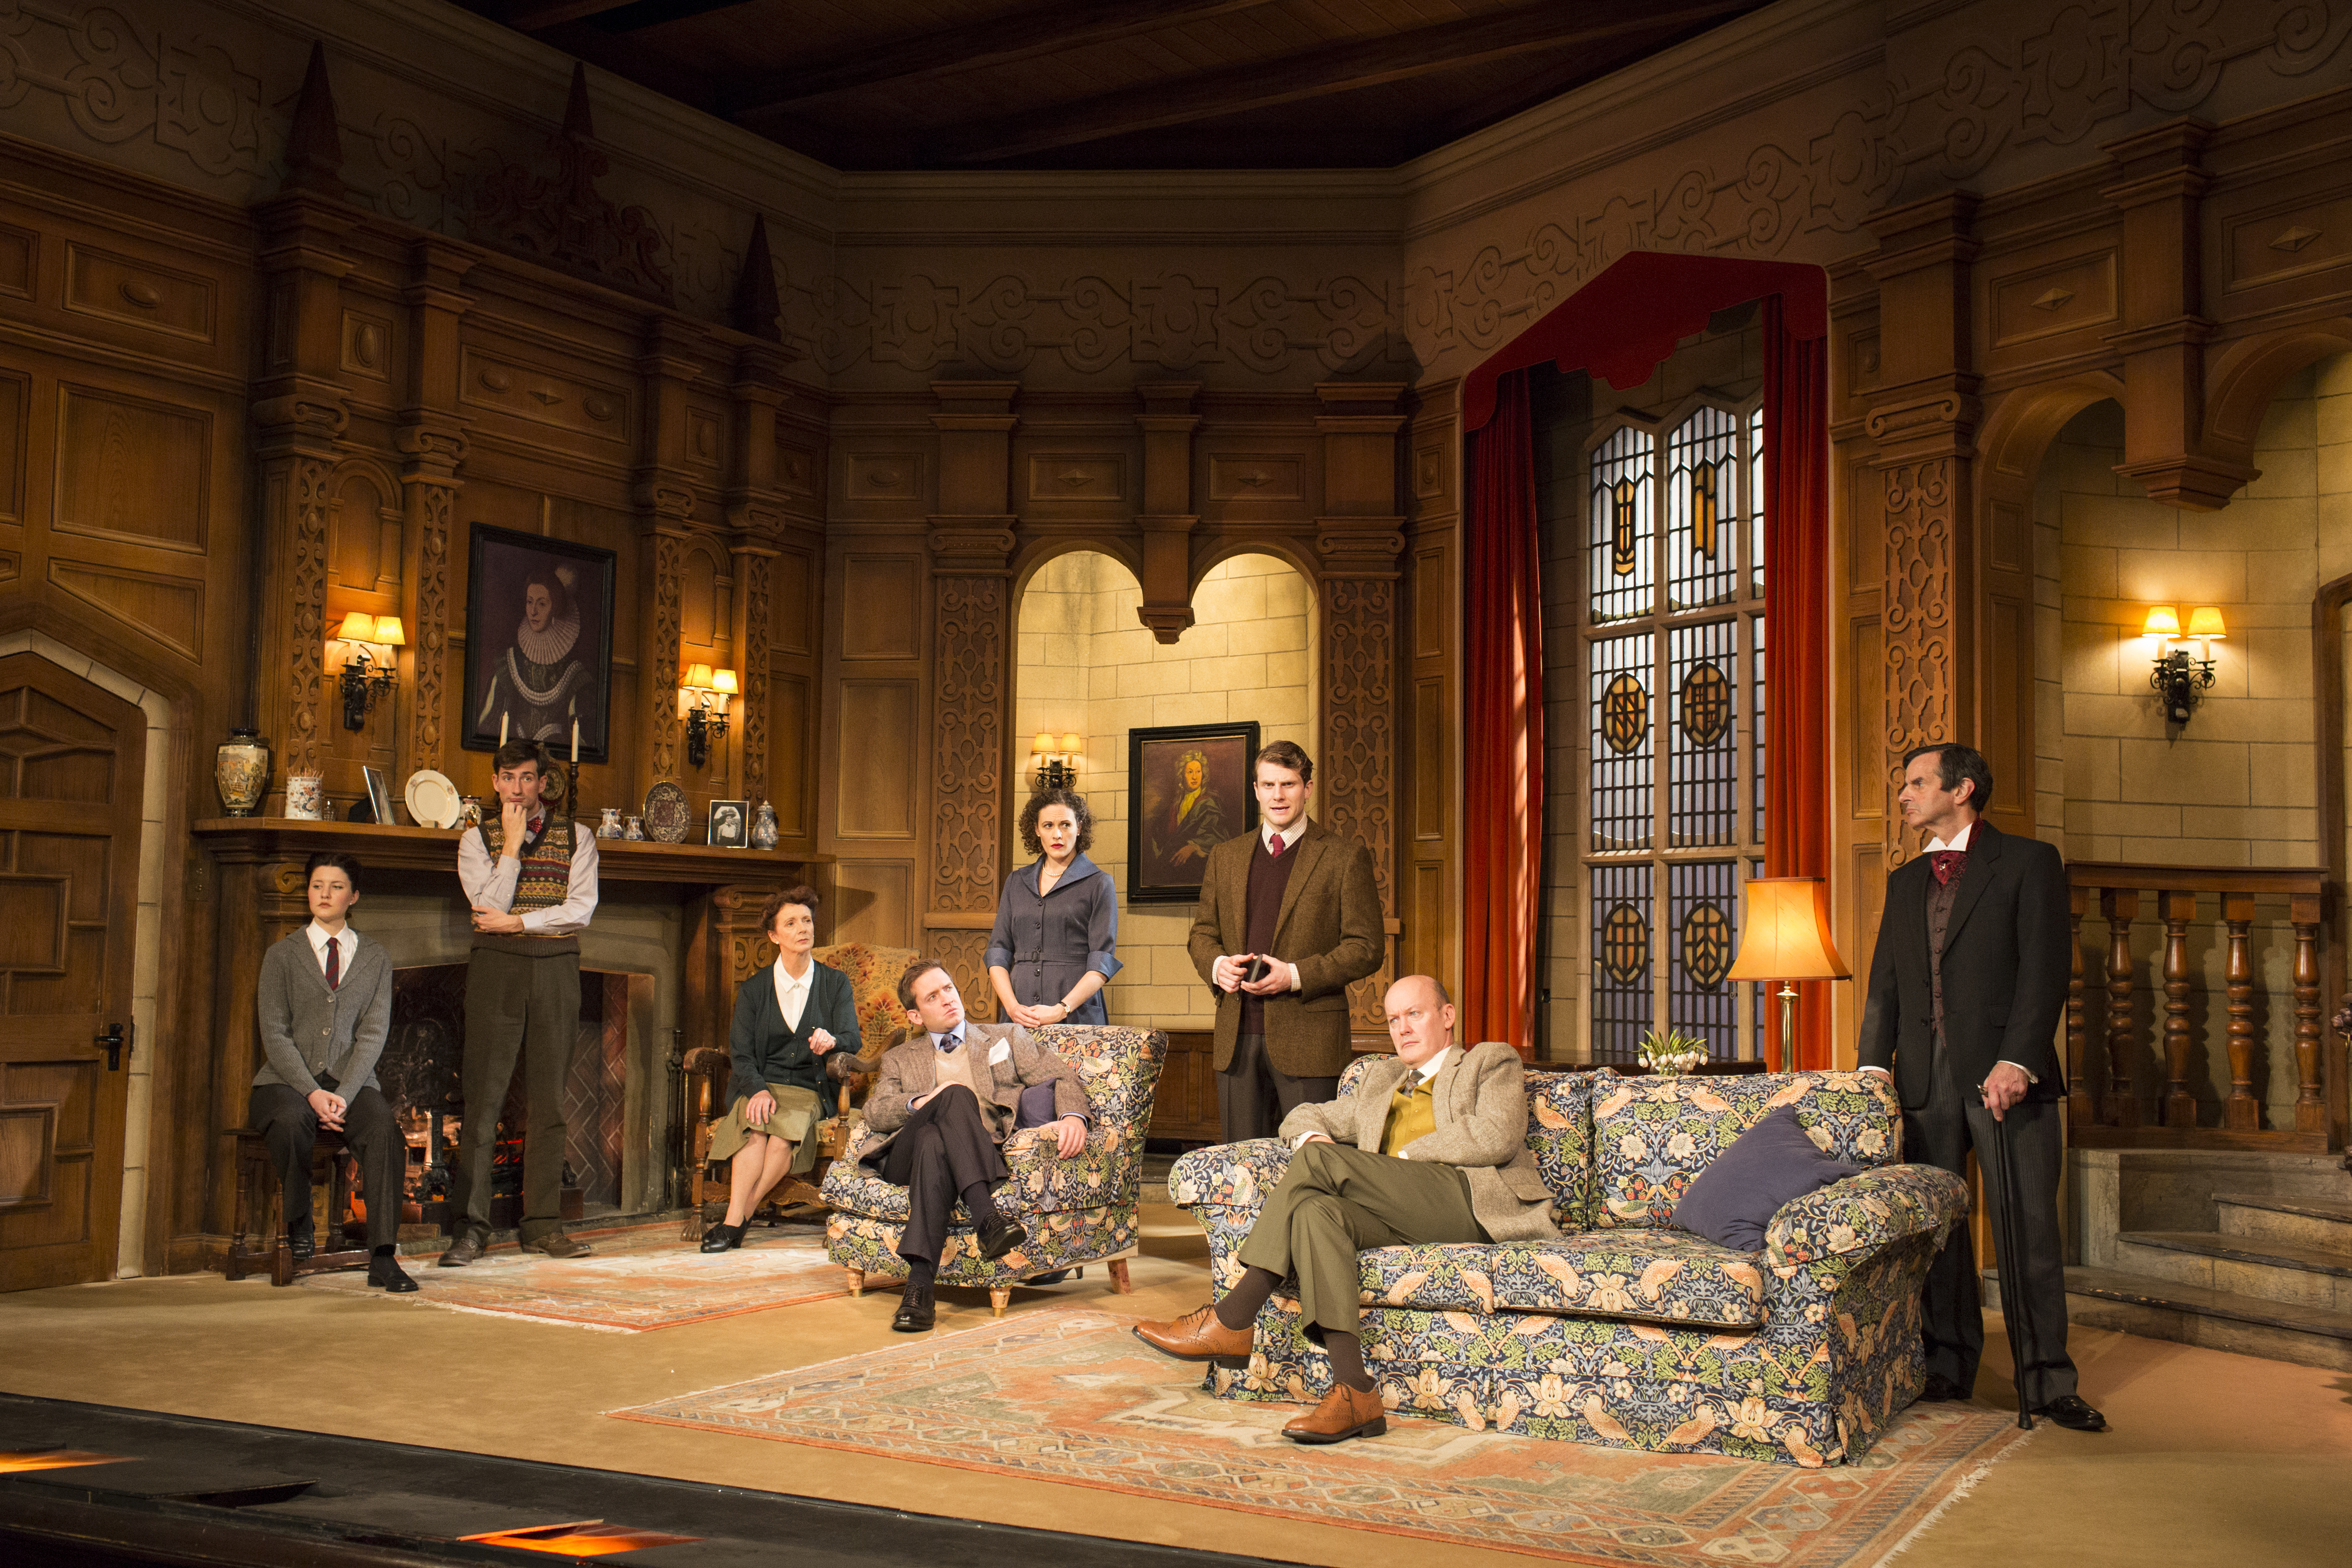 the mousetrap musical london